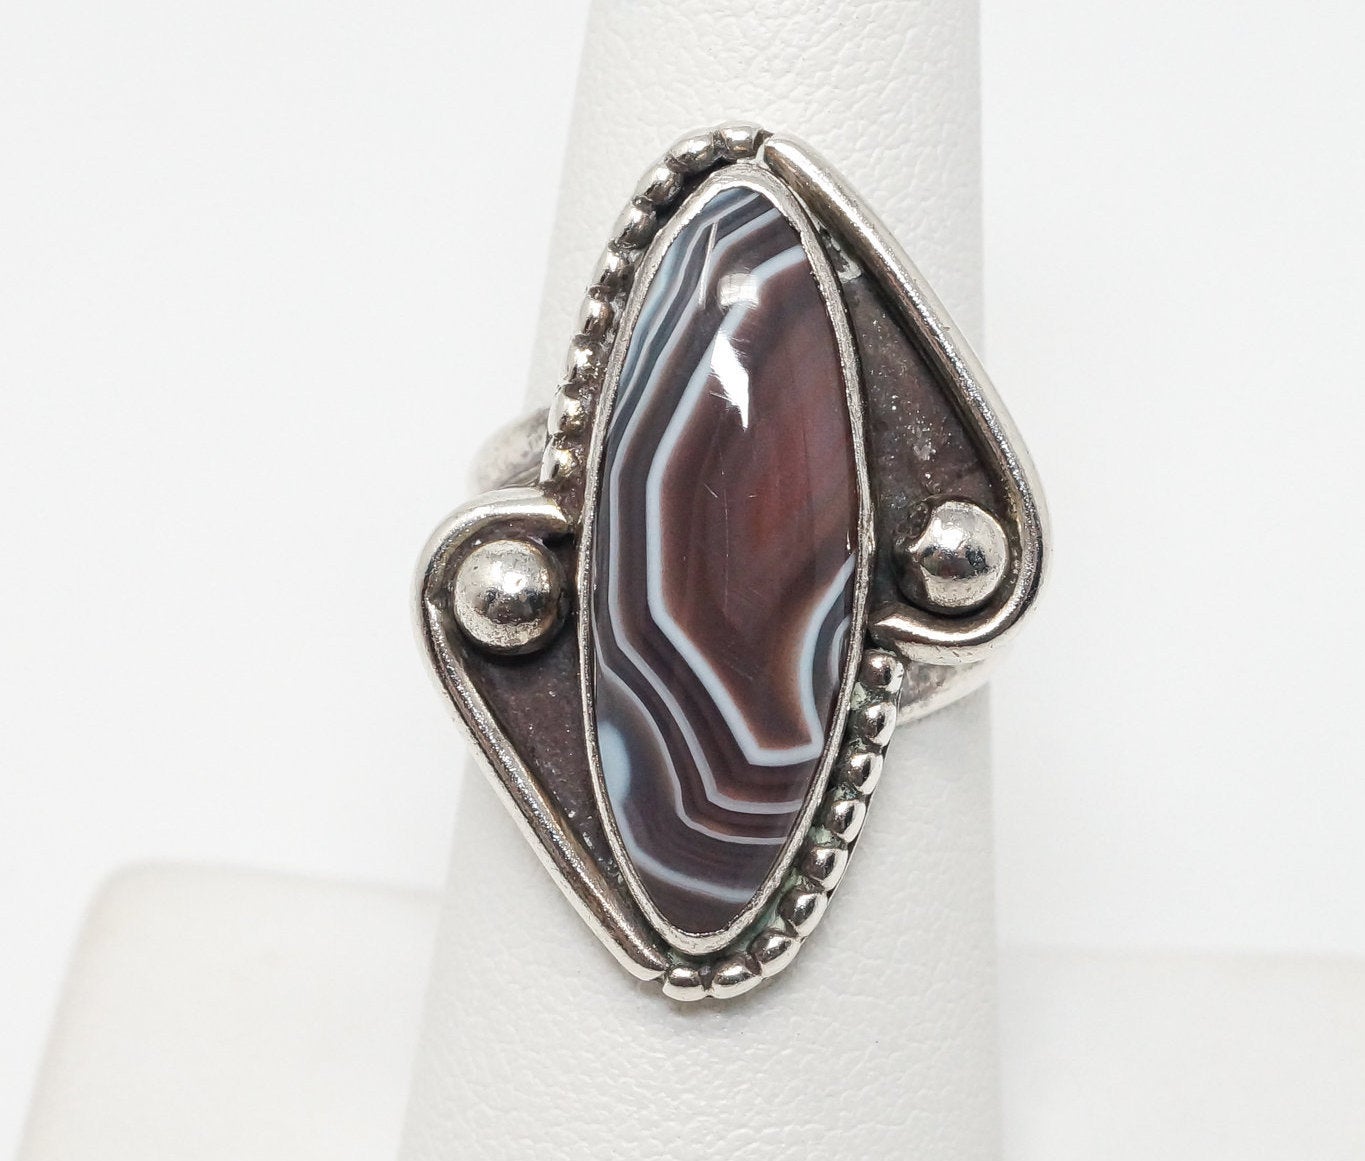 Vintage Native American Lace Agate Unsigned Sterling Silver Ring - Sz 6.75